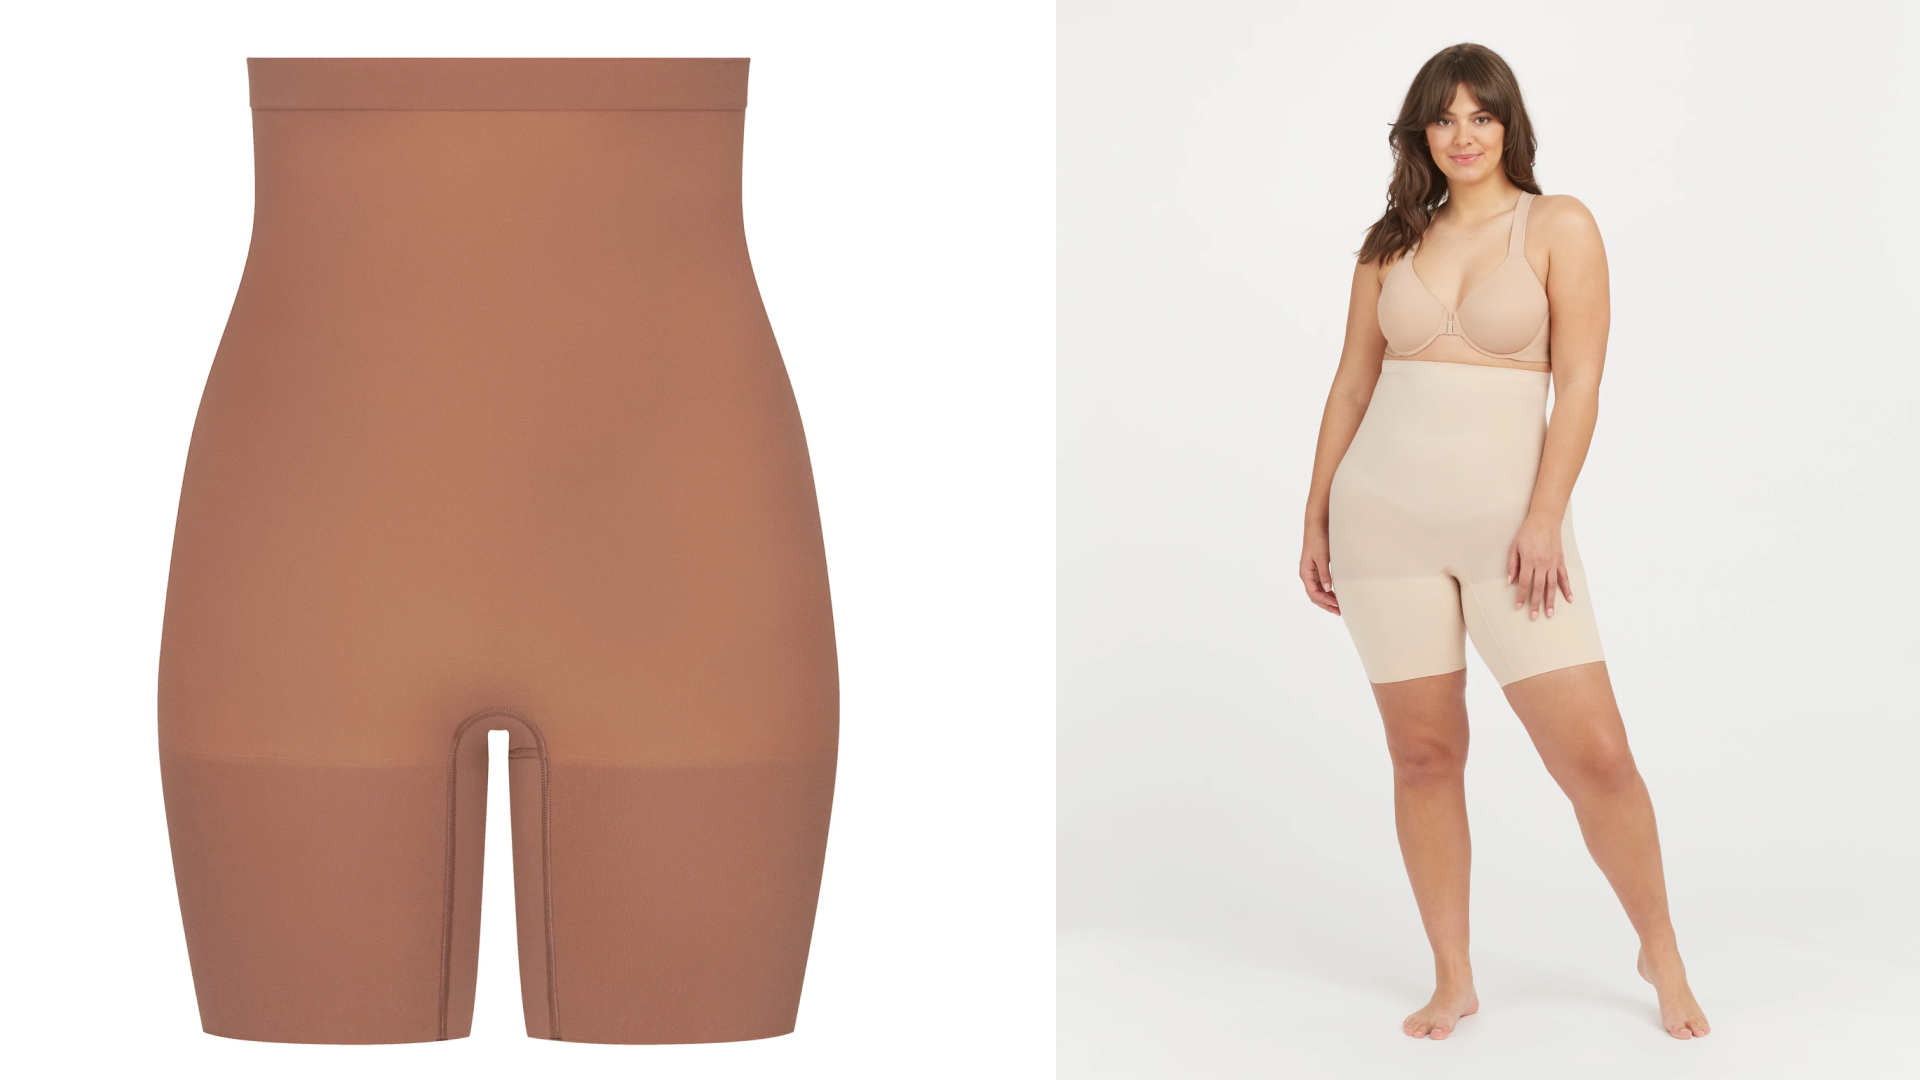 Replying to @kimbonecutter #greenscreen The best shapewear and